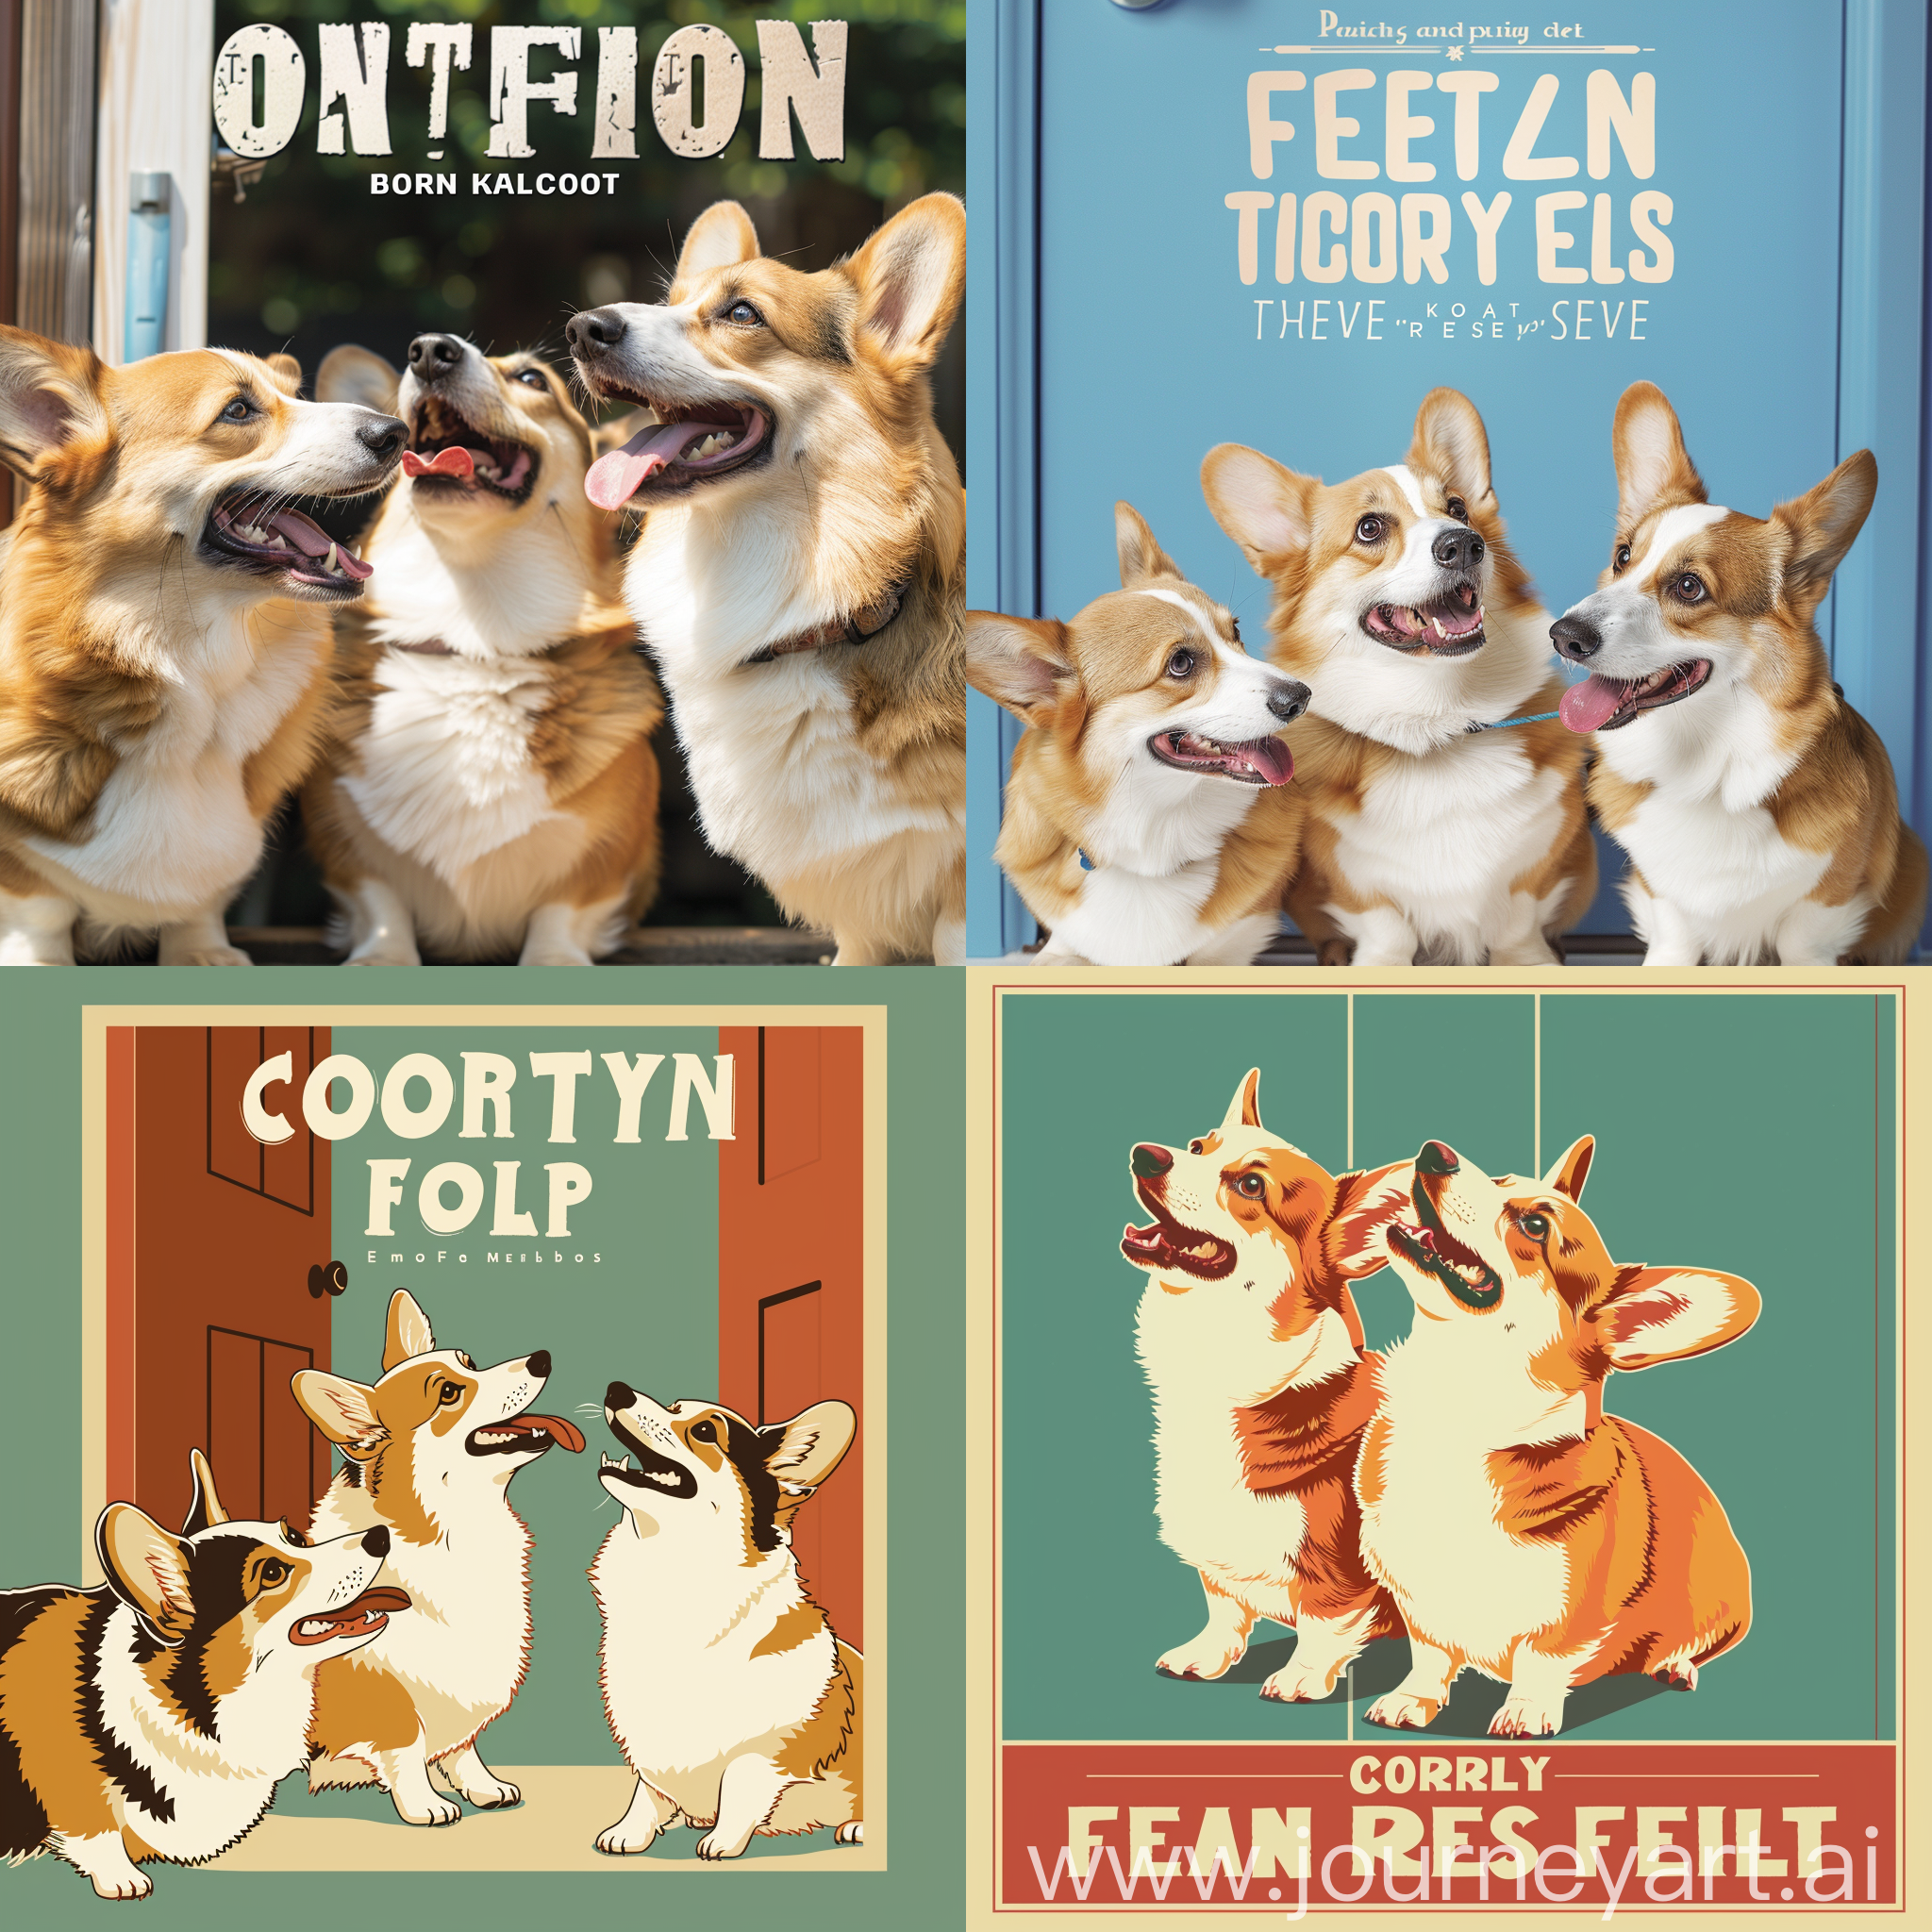 A poster about door-to-door feeding, featuring three corgis